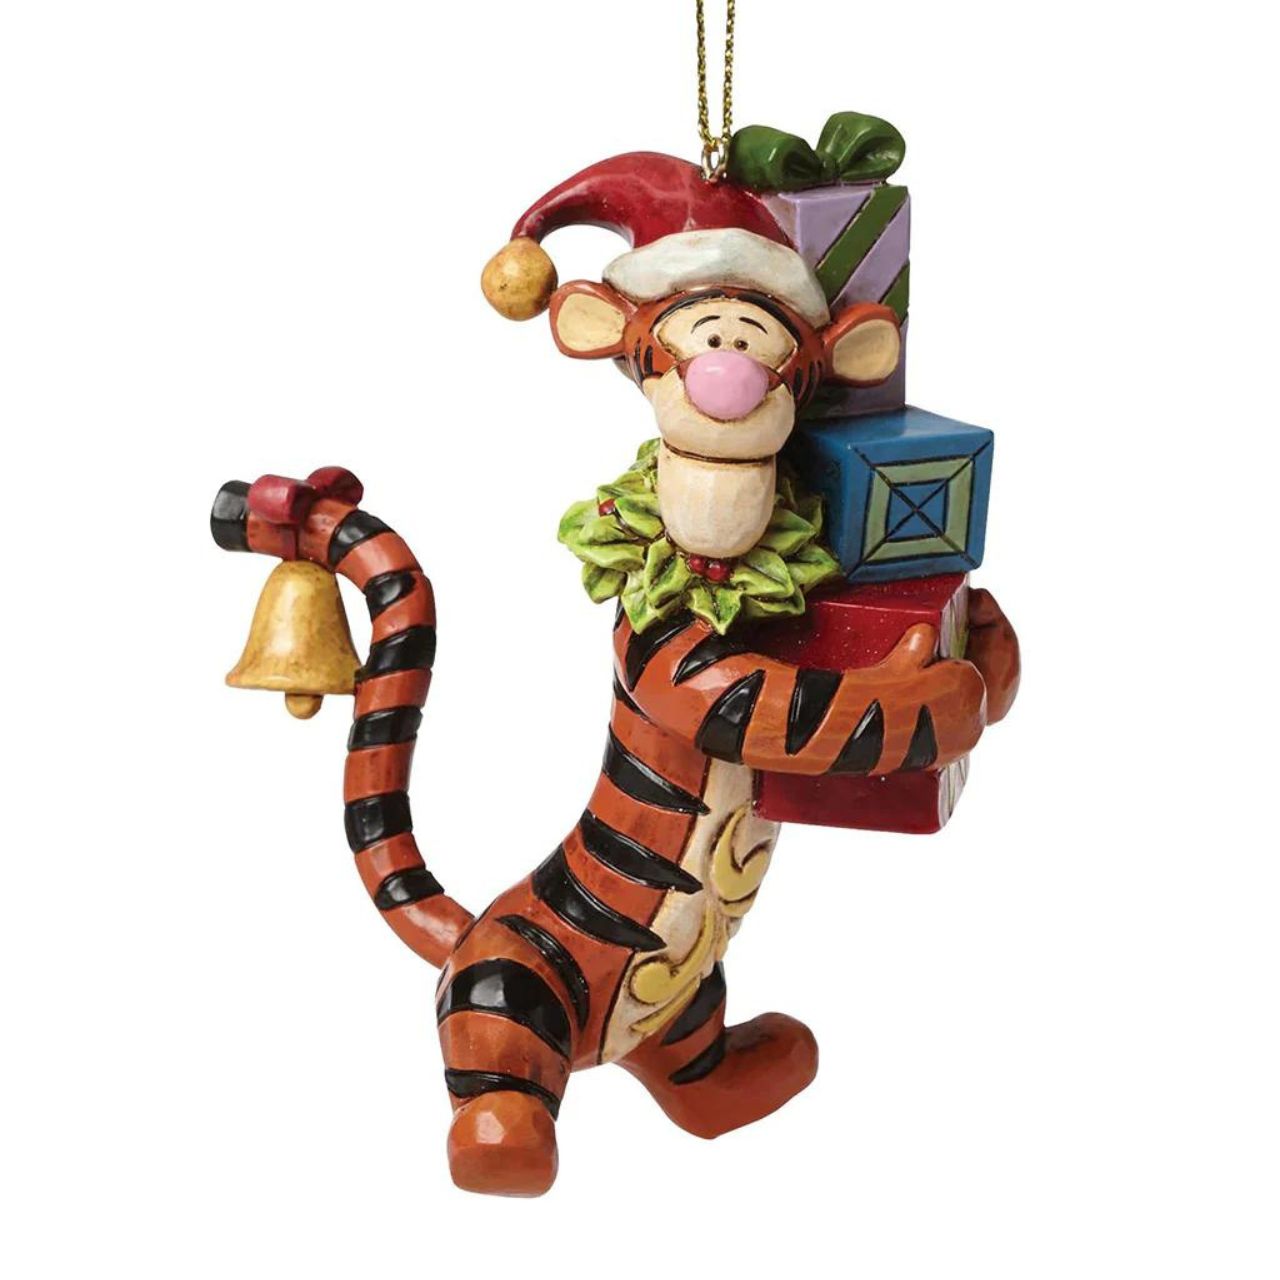 Disney Traditions Tigger Hanging Ornament  This hanging ornament shows that Tigger will do anything for ole St. Nick! Designed by award winning artist and sculptor, Jim Shore for the Disney Traditions brand. The hanging ornament is made from cast stone.